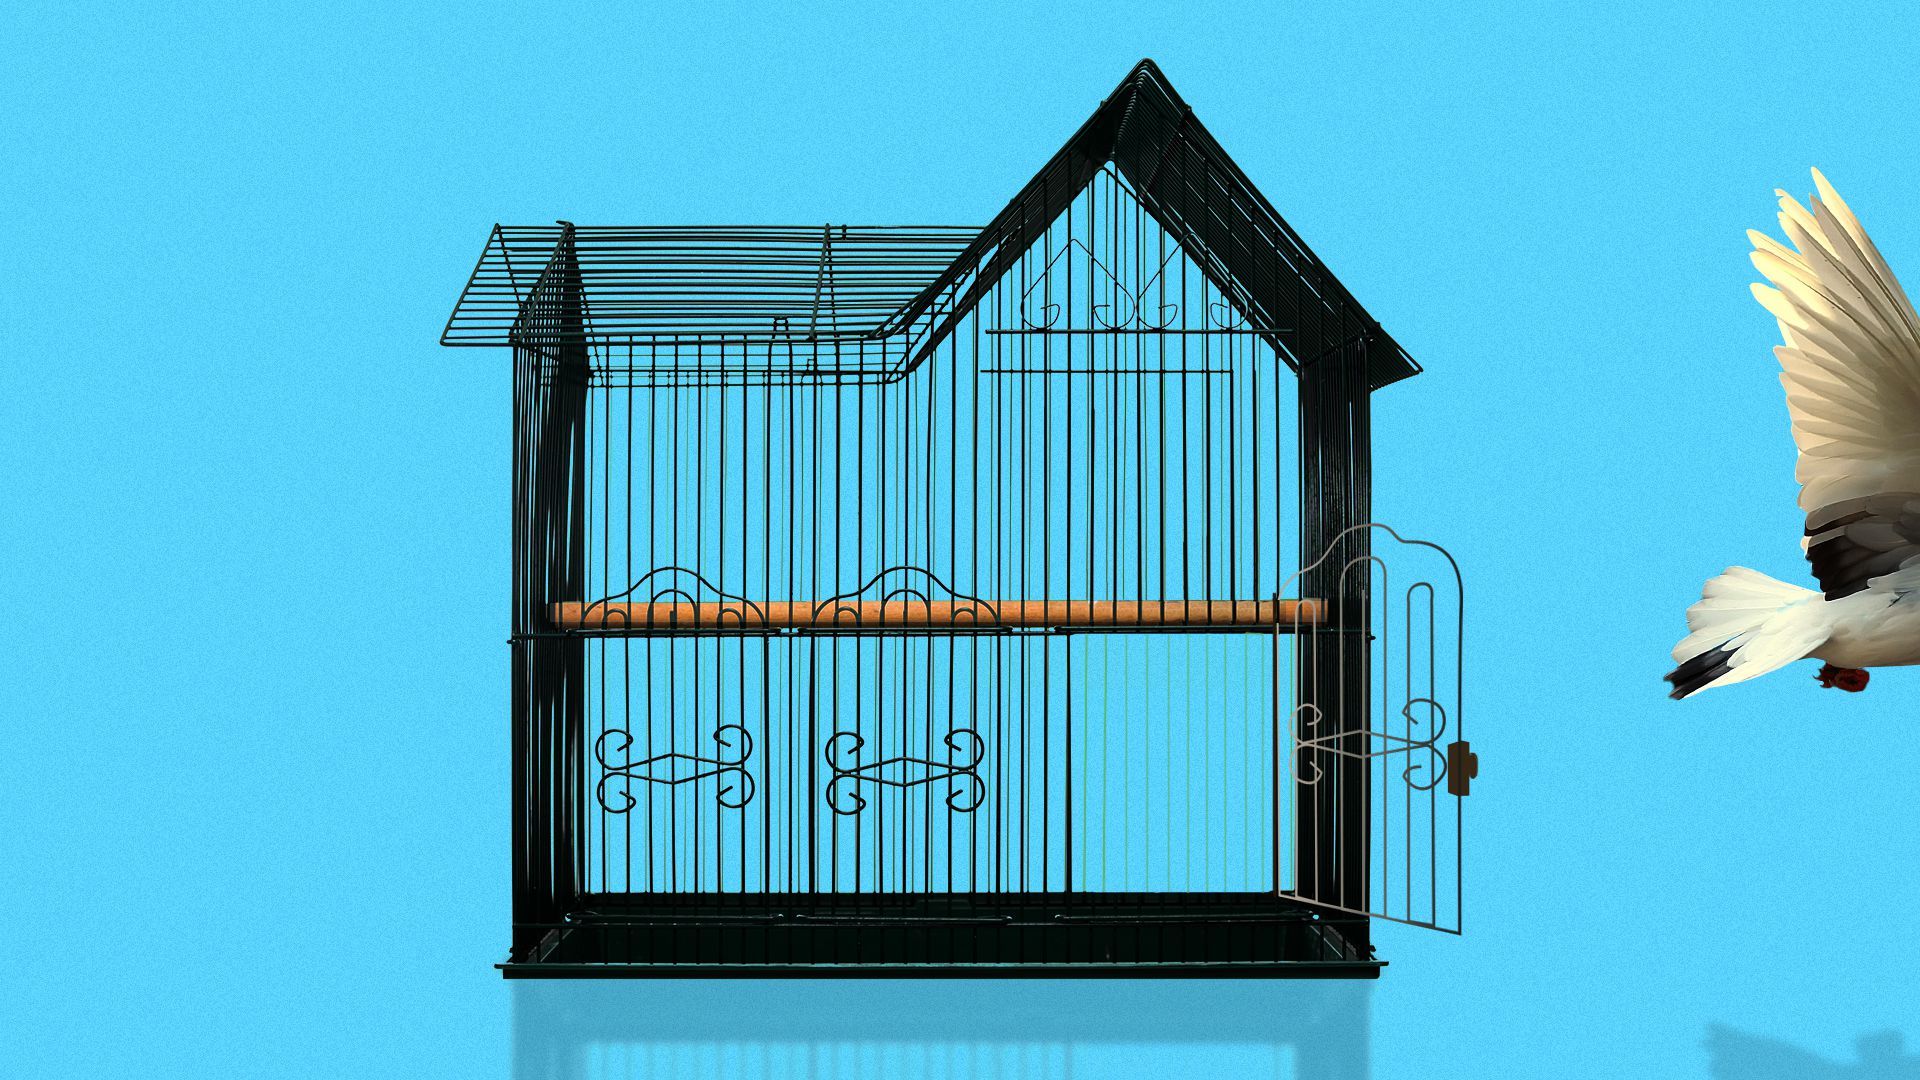 Illustration of a bird flying away from an open cage shaped like a house